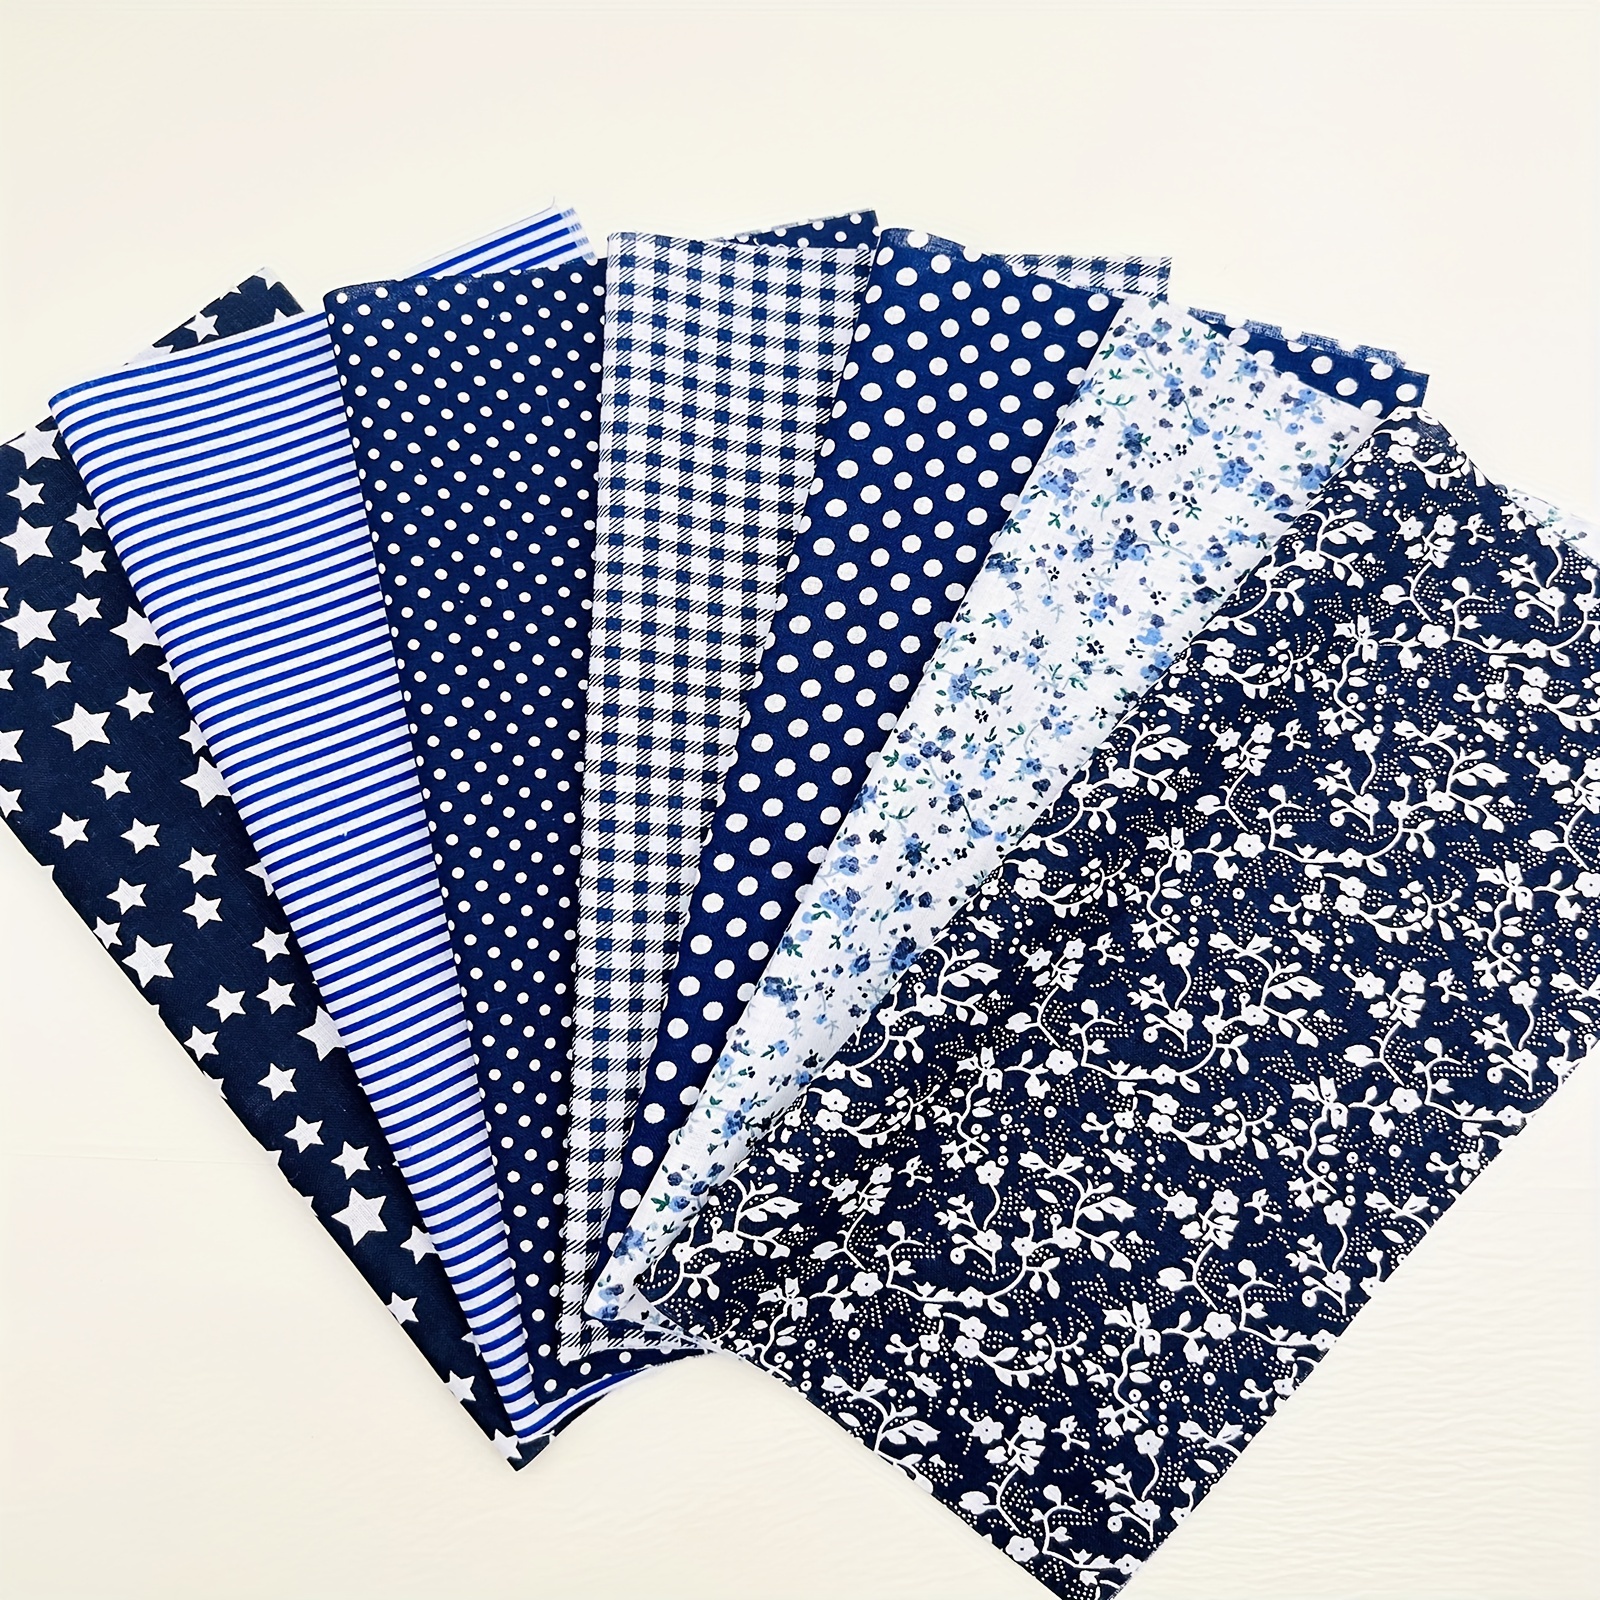 

7pcs 9.8*9.8in Navy Blue Cotton Quilted Quarter Fabric Bundles For Handcraft Diy Clothing Sewing Process